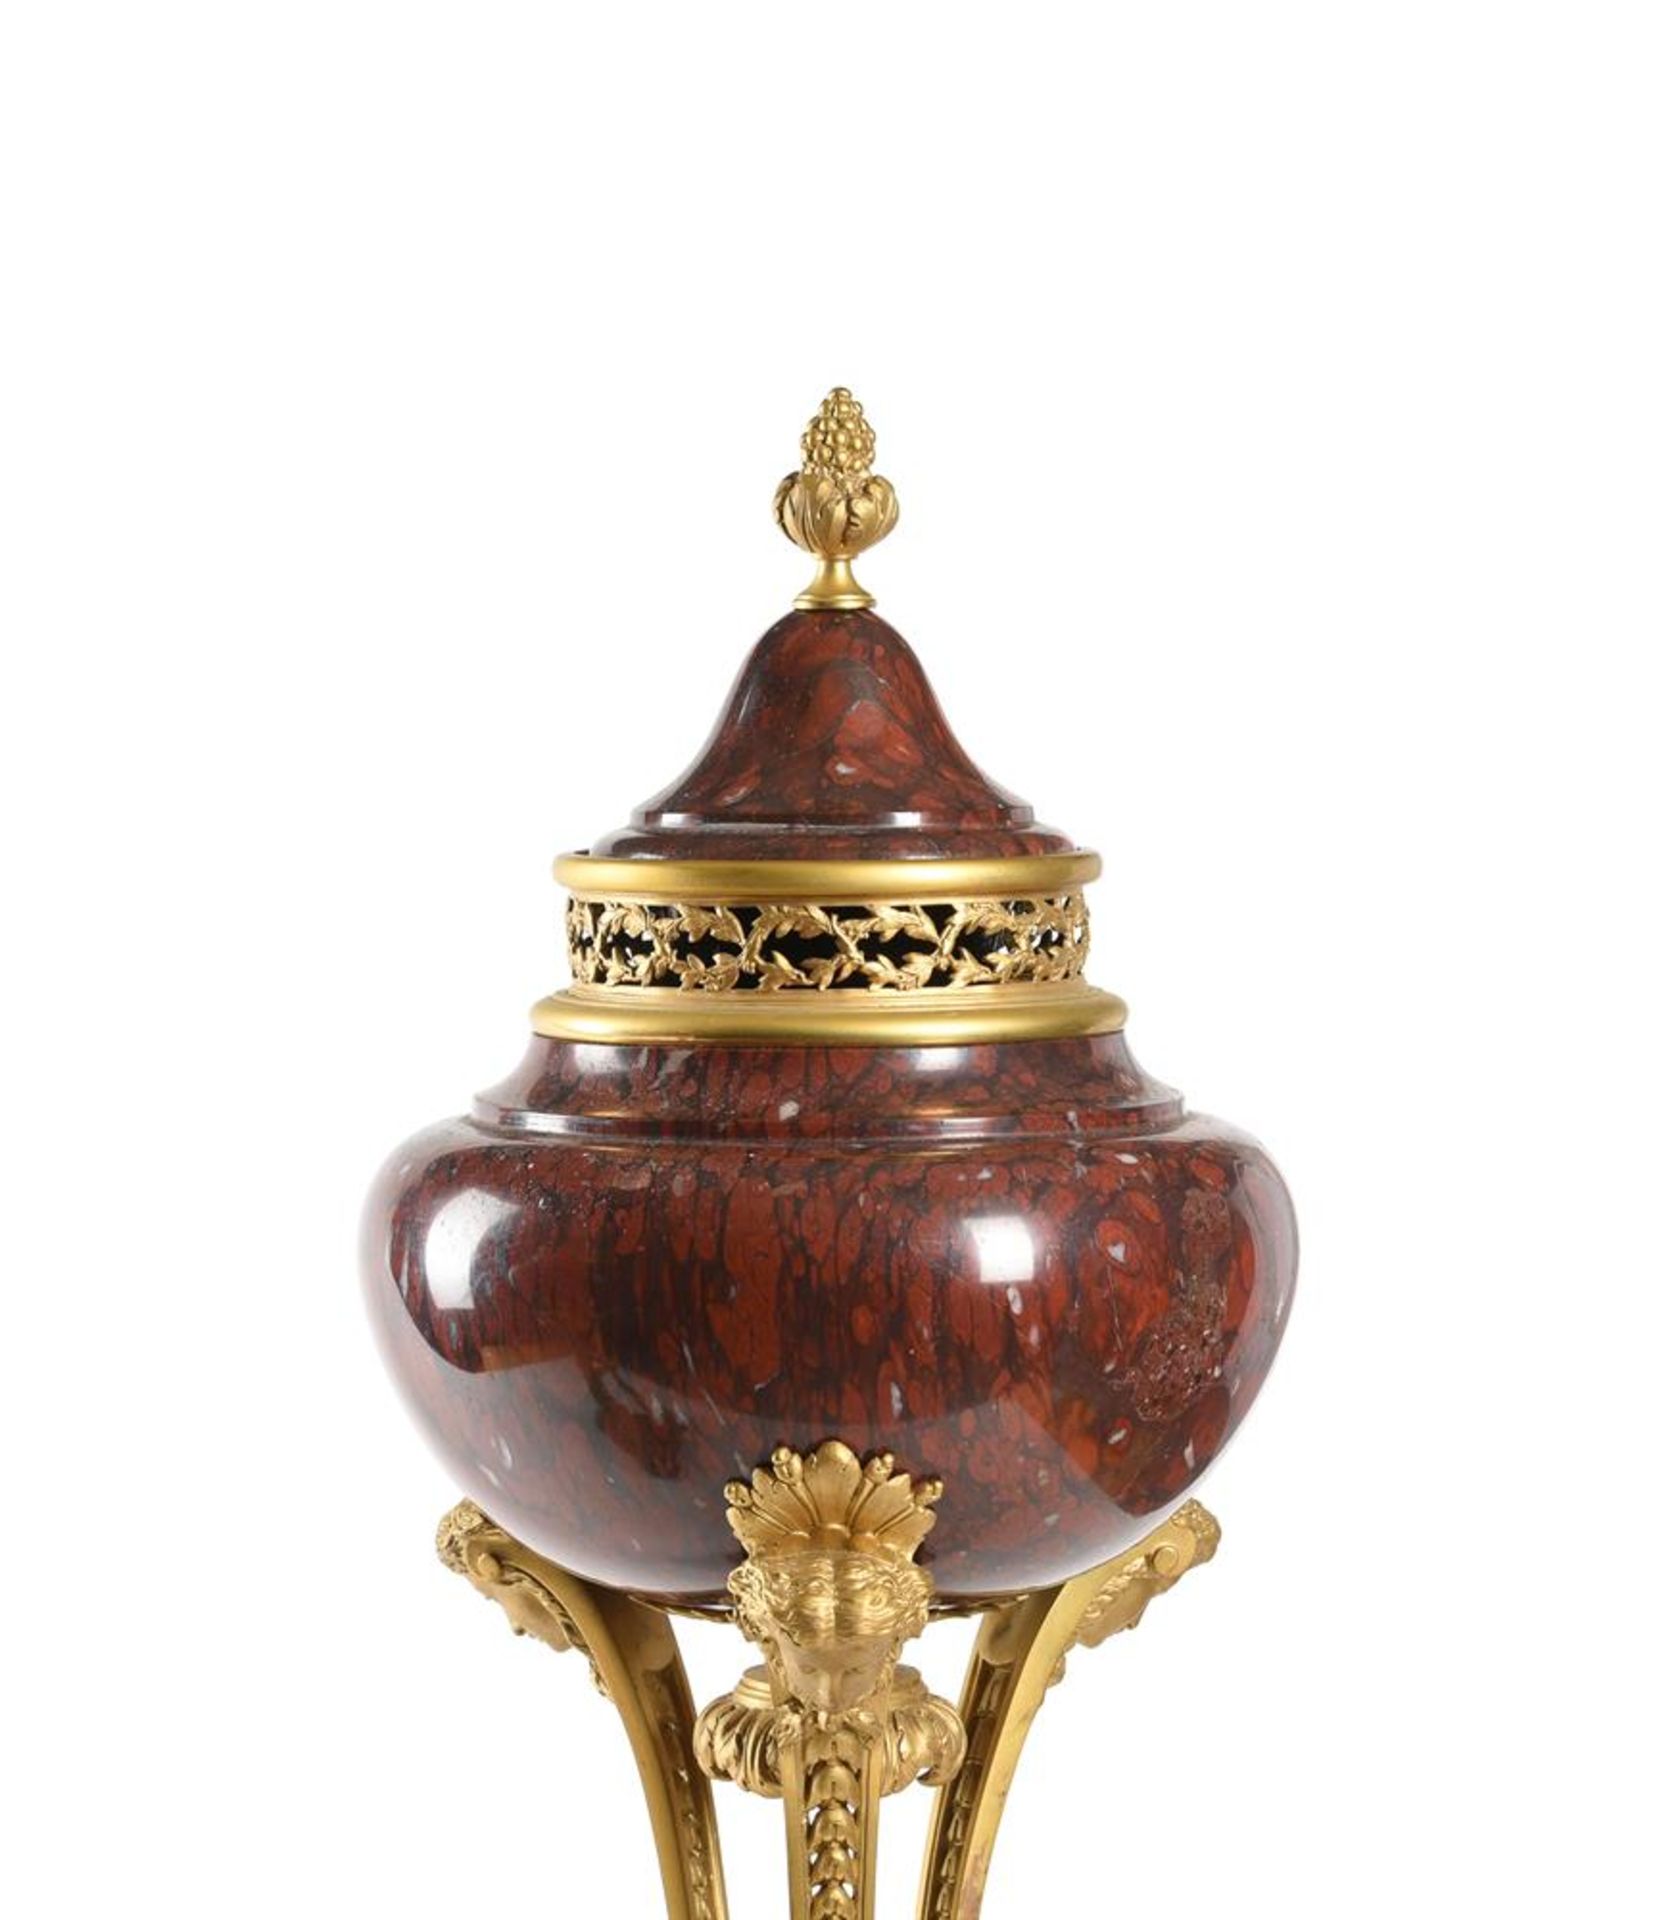 A LARGE PAIR OF FRENCH ORMOLU MOUNTED ROUGE GRIOTTE MARBLE BRULE PARFUMS, 19TH OR 20TH CENTURY - Image 3 of 4